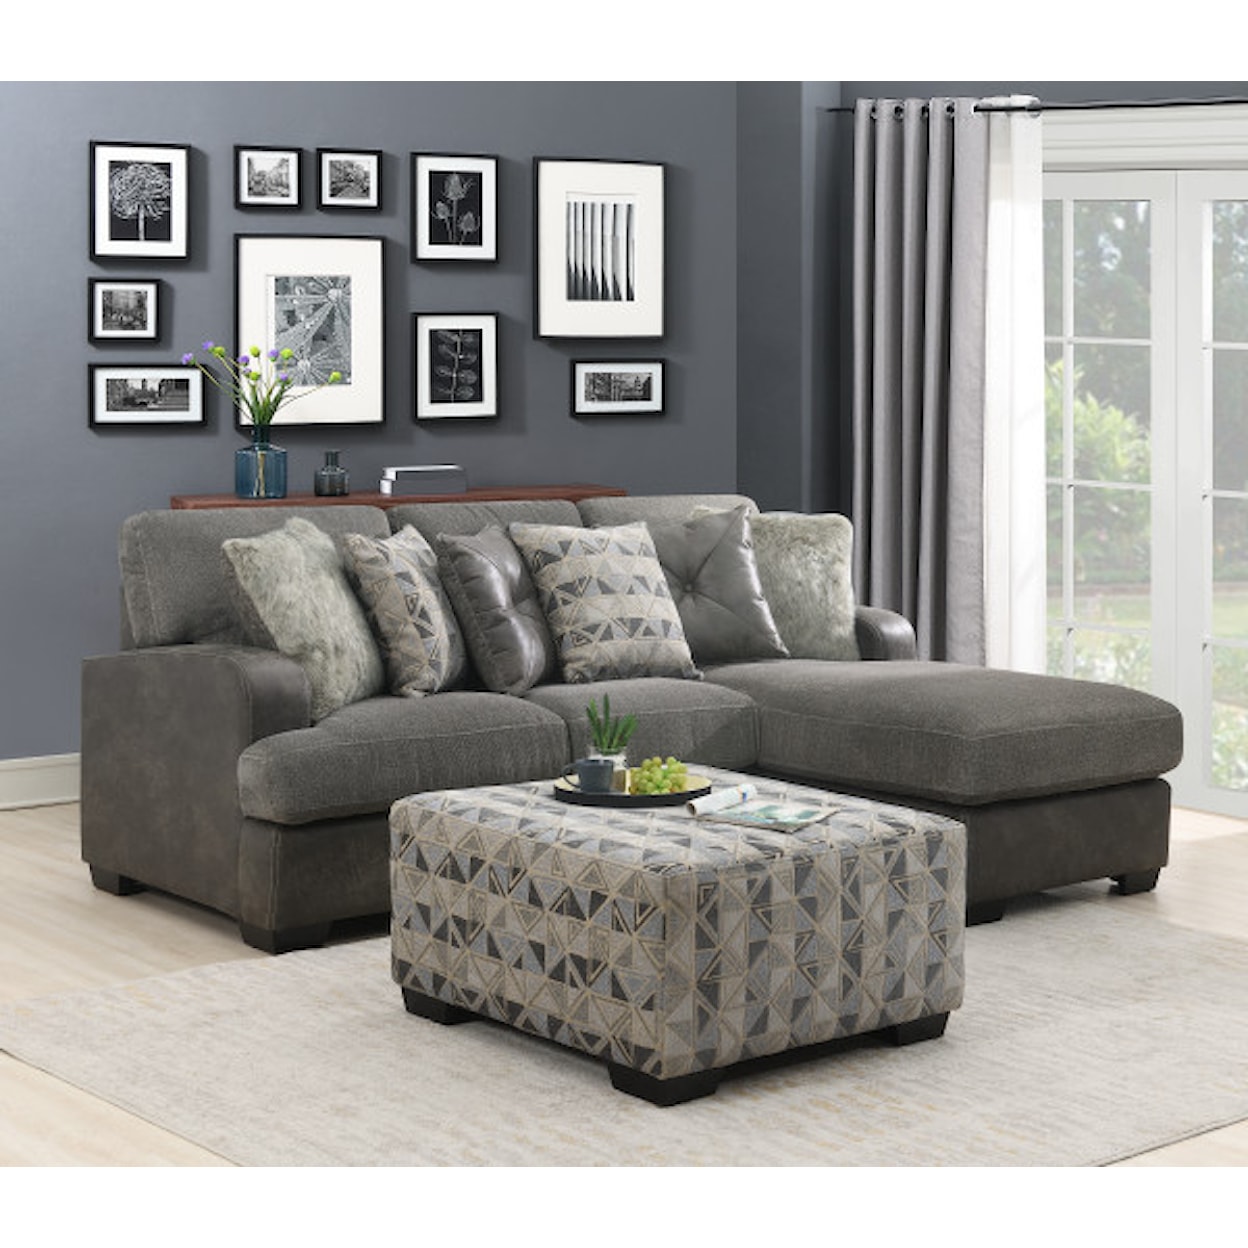 Emerald Berlin 2-Piece RSF Chaise Sectional